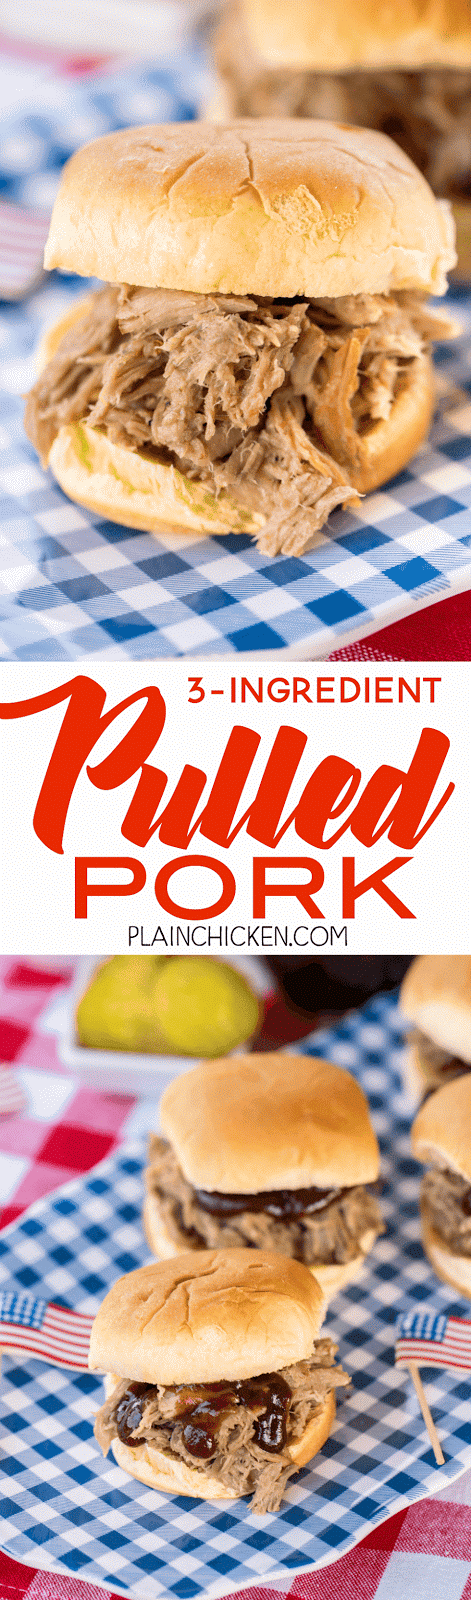 3-Ingredient Pulled Pork - slow cooked pork shoulder that is better than any restaurant! Great on hamburger buns, on top of a baked potato, nachos or a salad. All you need is some slaw and baked beans and you are all set. Easy peasy party! You can also freeze the leftovers for later.